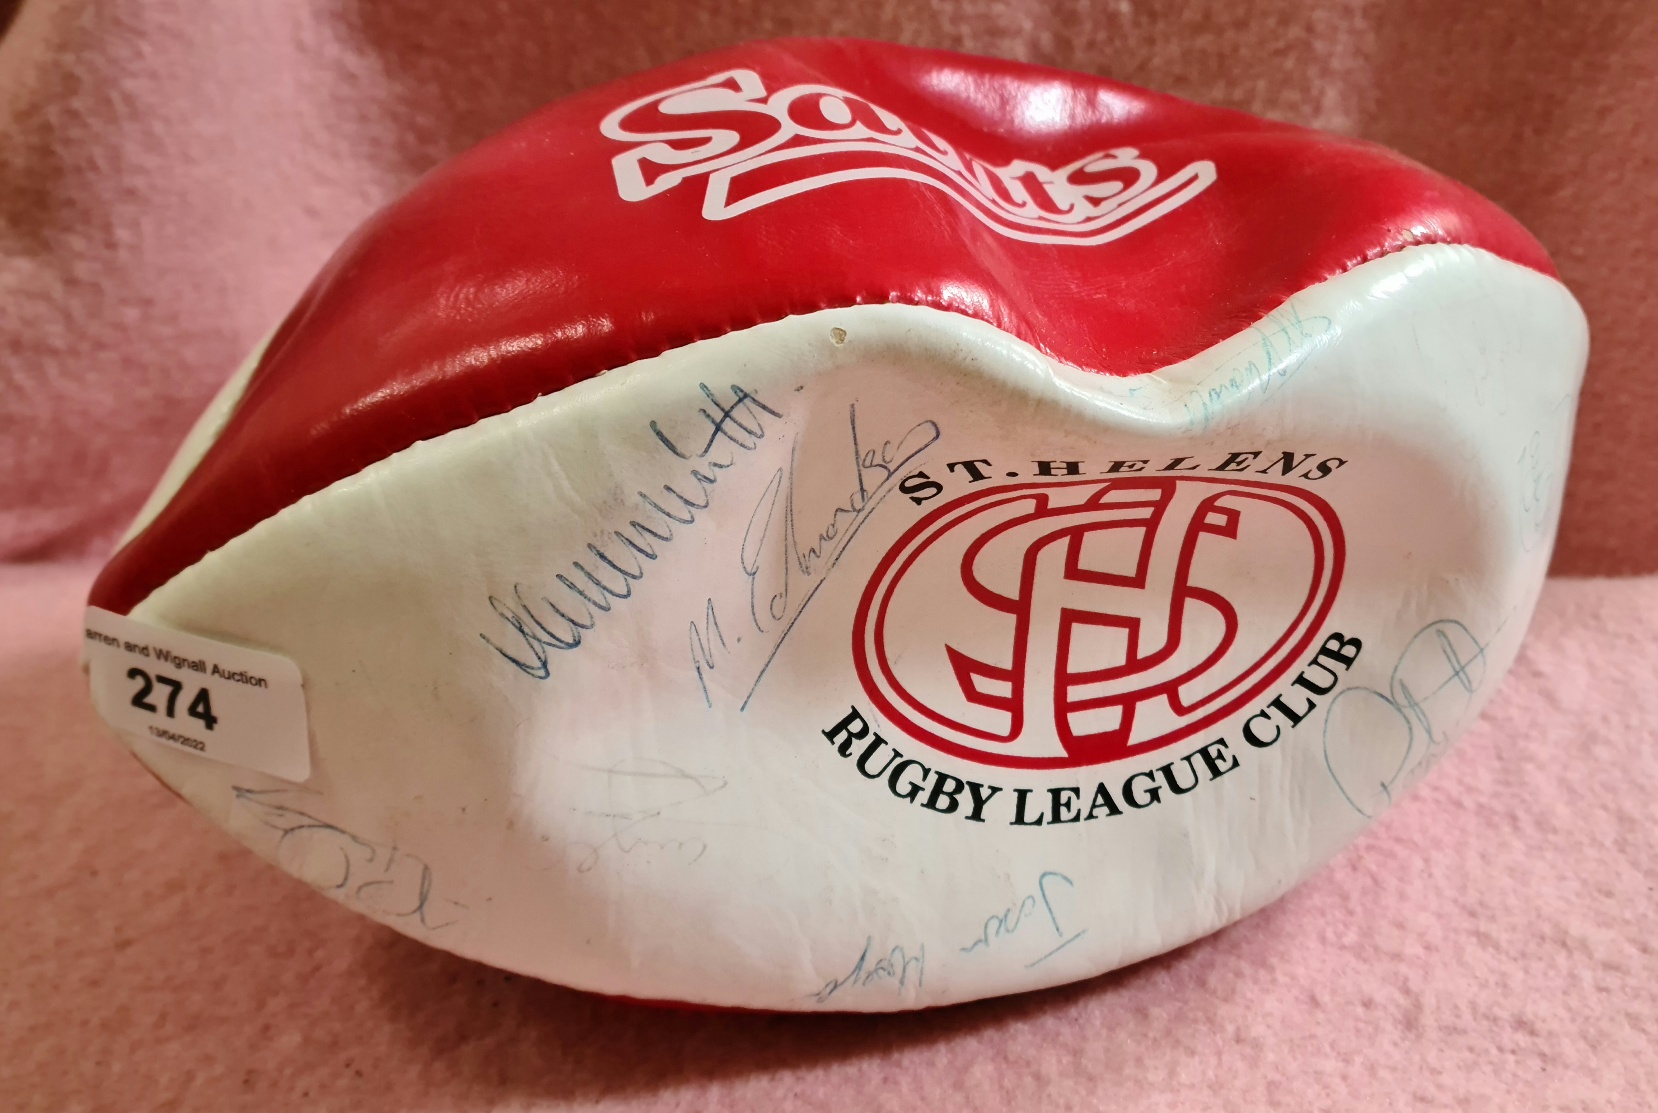 A St. Helens Rugby League Club signed ball.